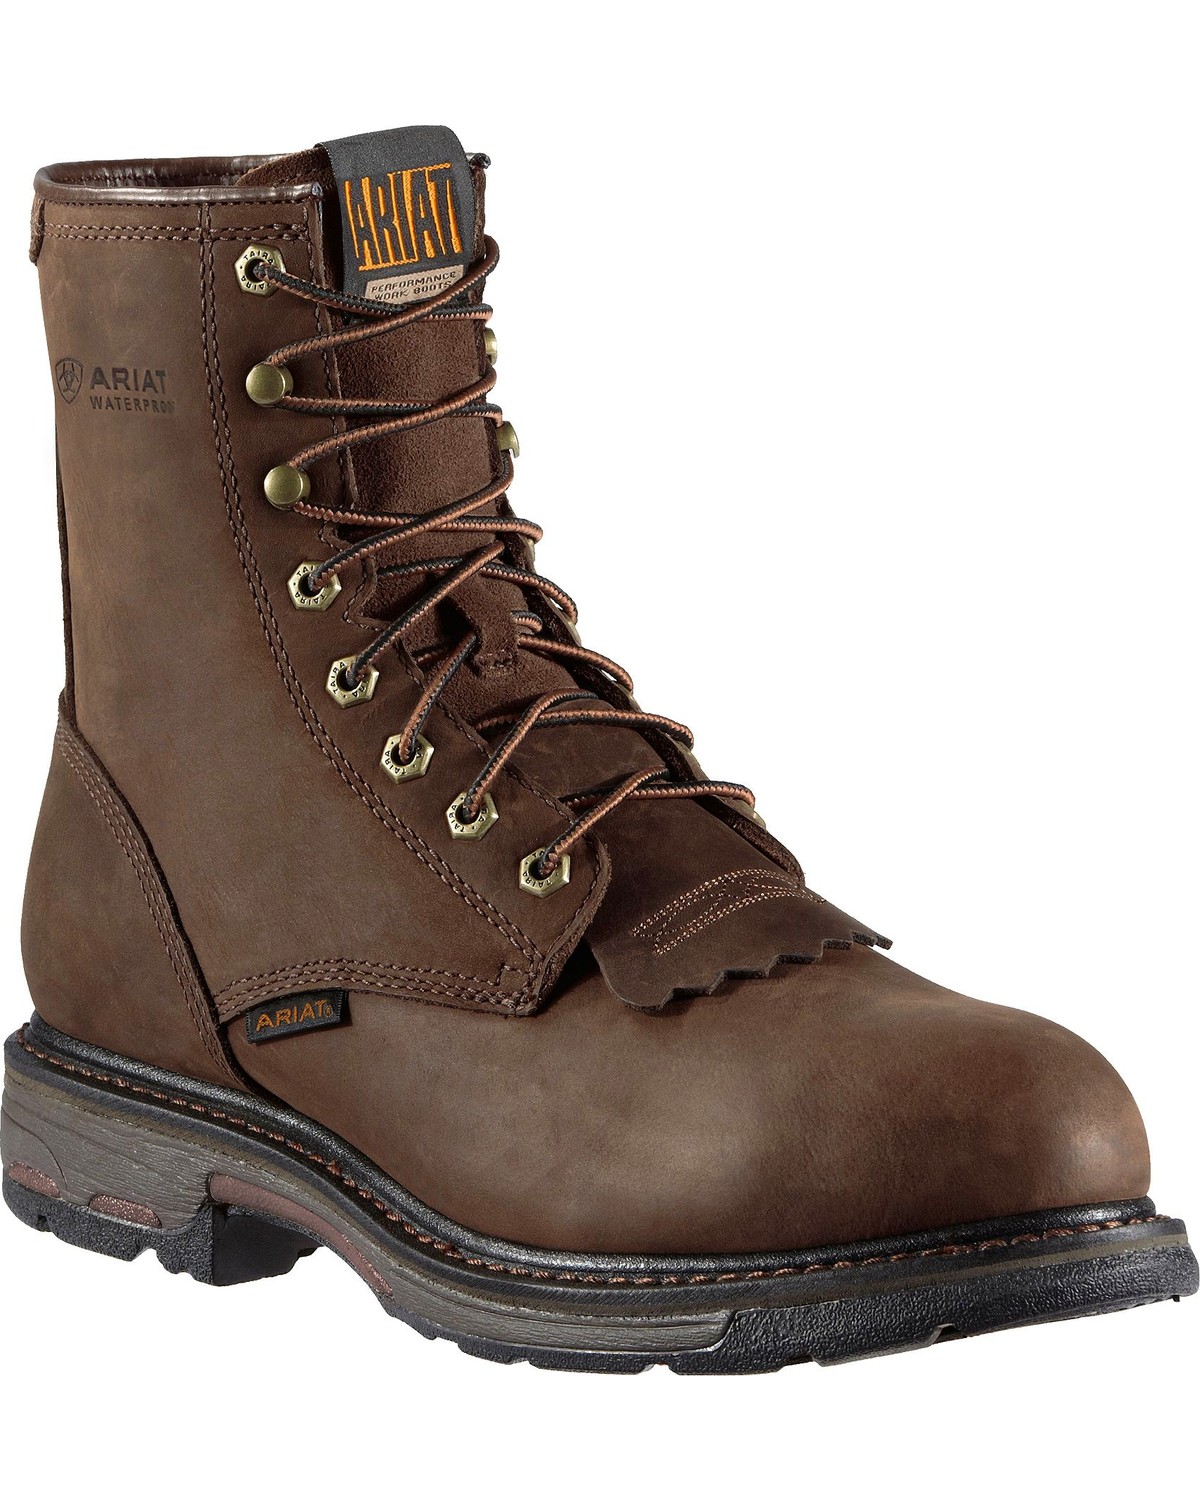 Ariat Men's WorkHog® H2O 8" Lace-Up Work Boots - Round Toe